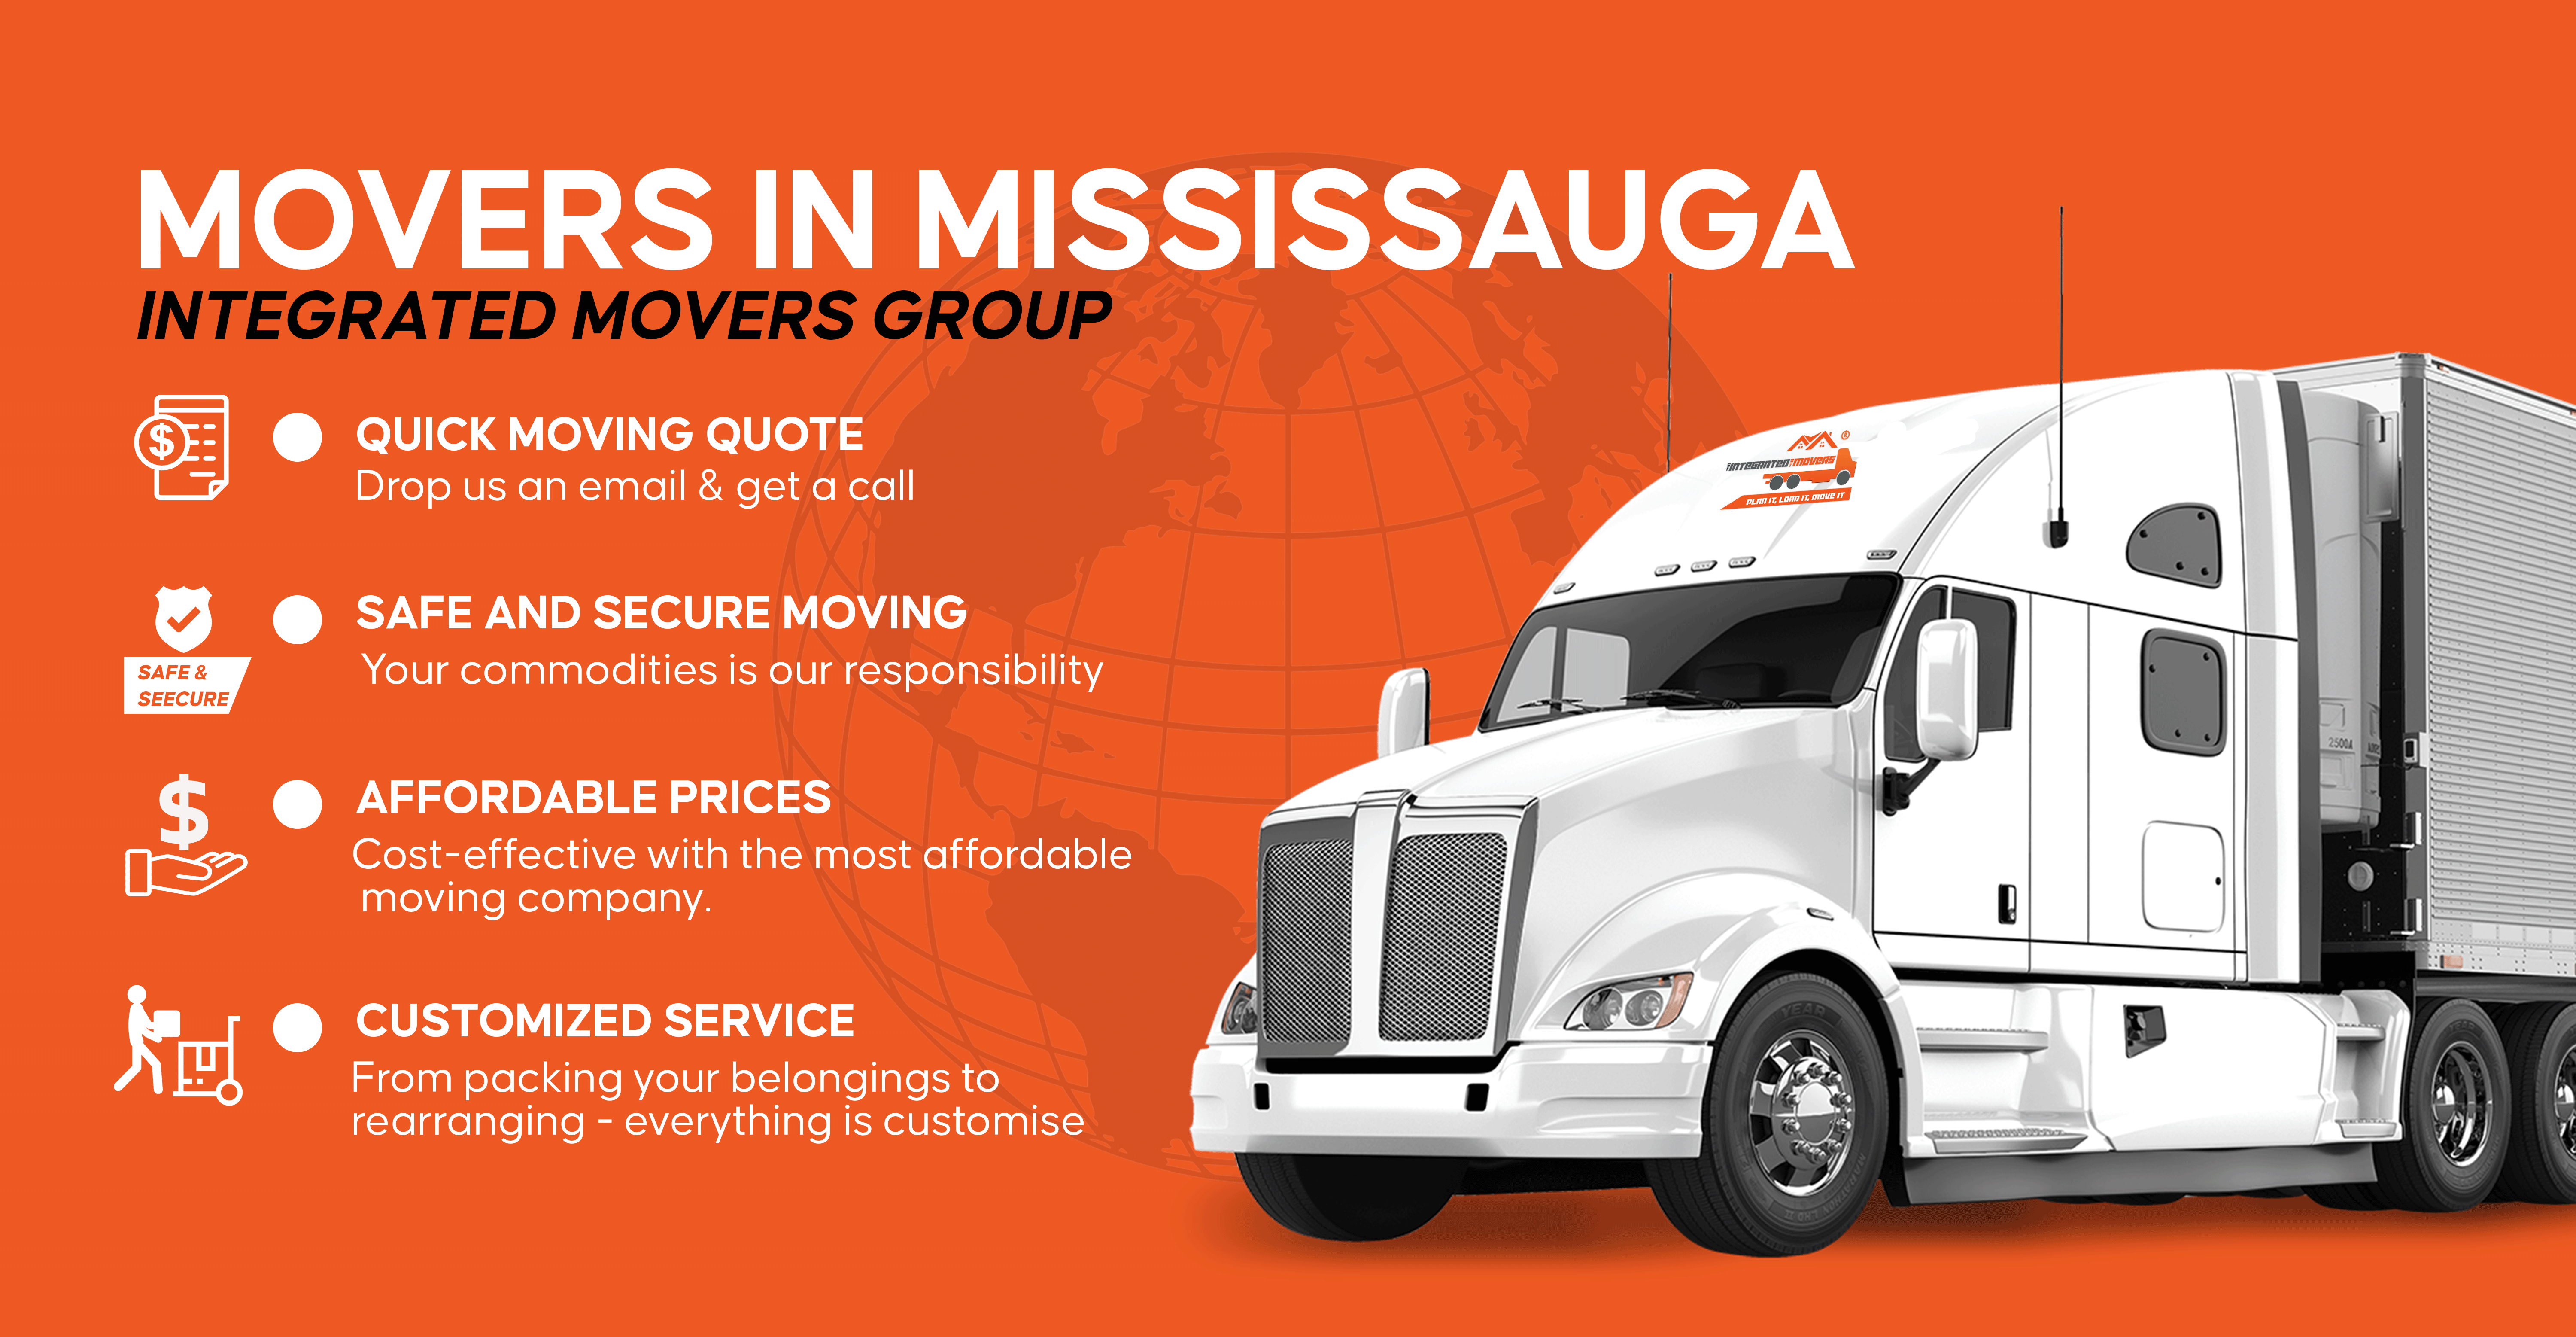 OFFICE & COMMERCIAL MOVERS Truck in Mississauga